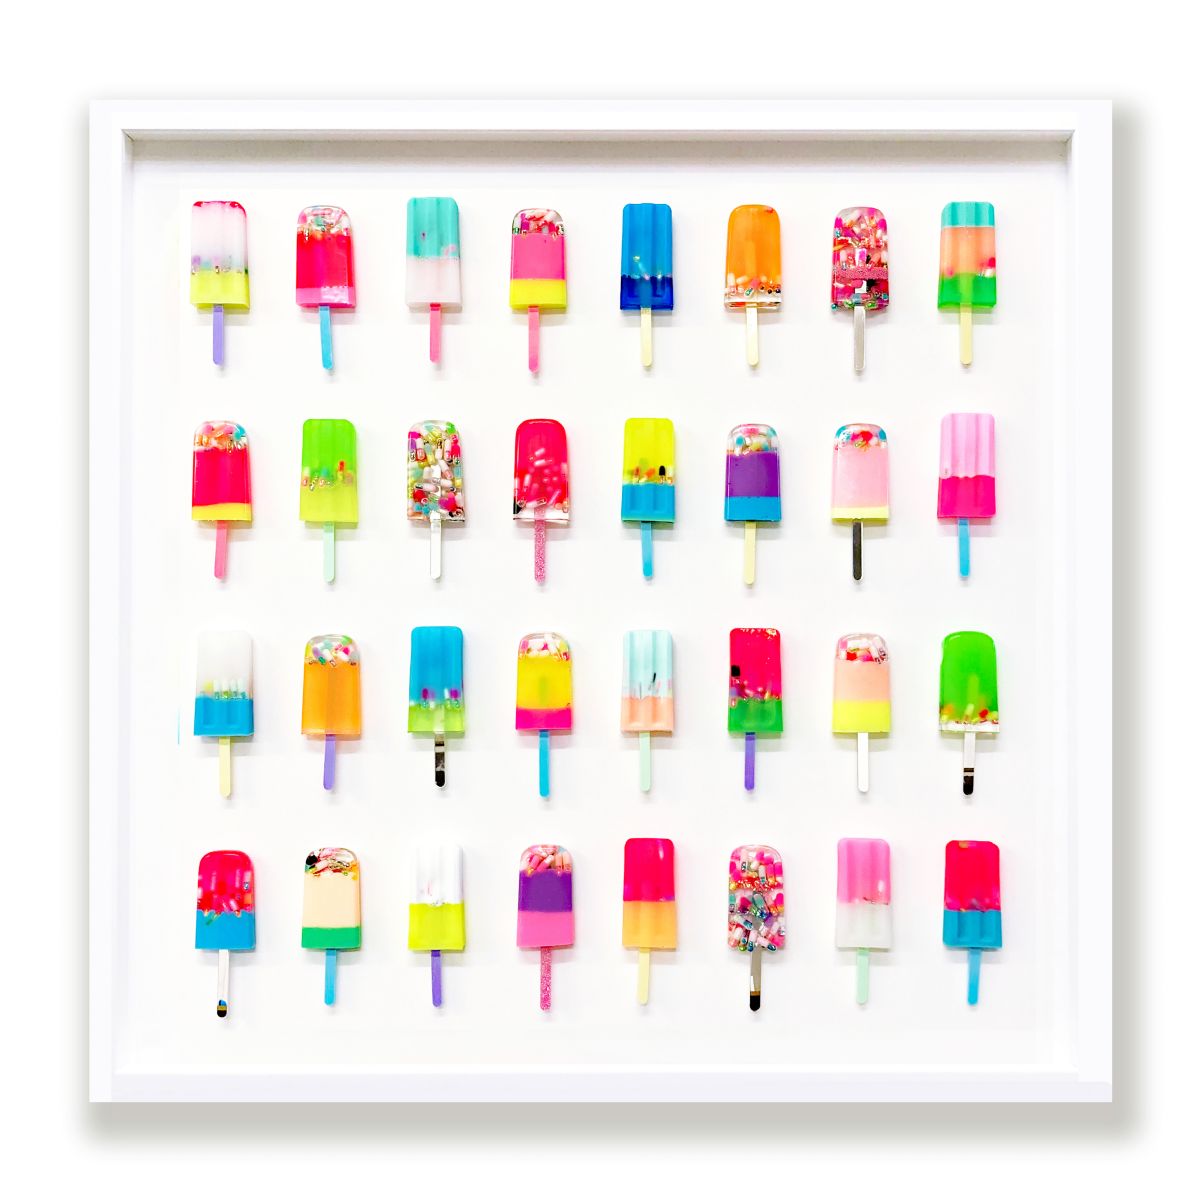 Chill Pill Popsicle by Emma Gibbons